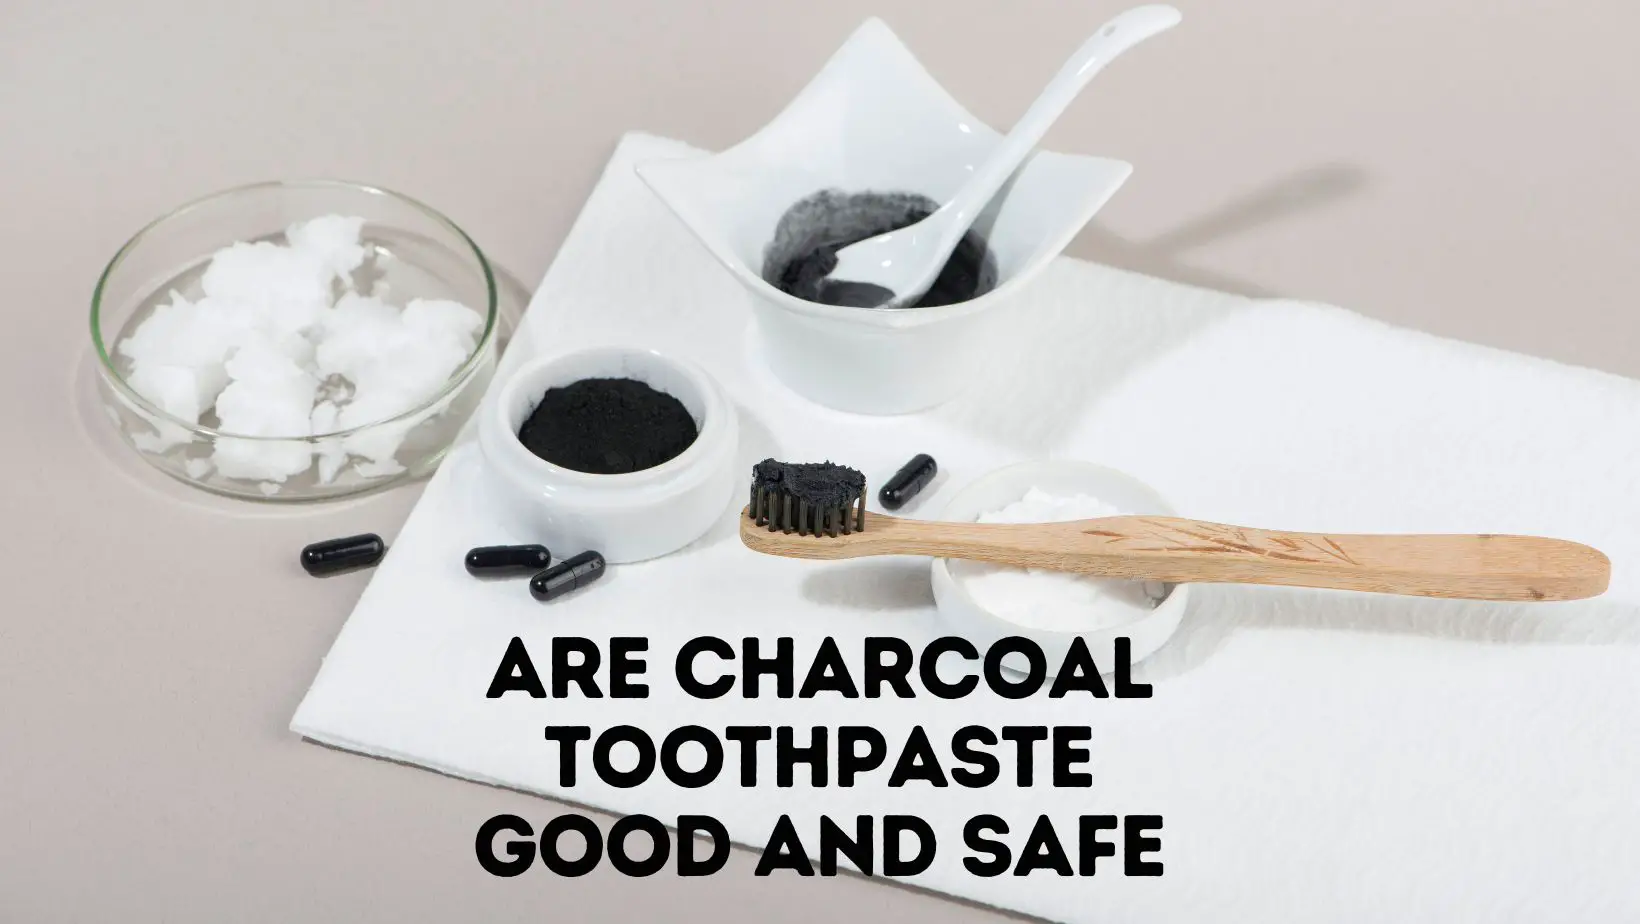 Are Charcoal Toothpaste Good and Safe